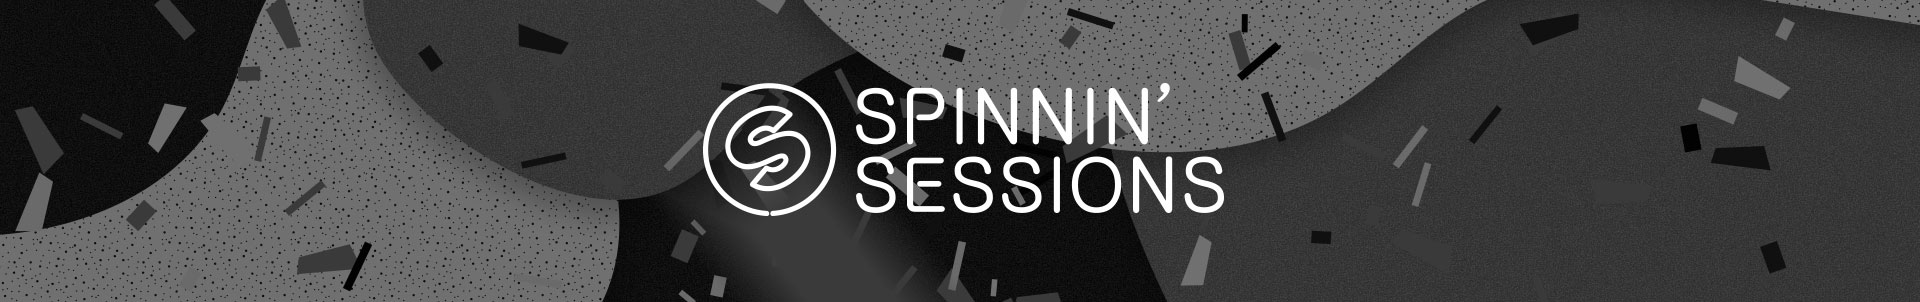 Spinnin' Sessions brings first 'Best Of 2017' mix